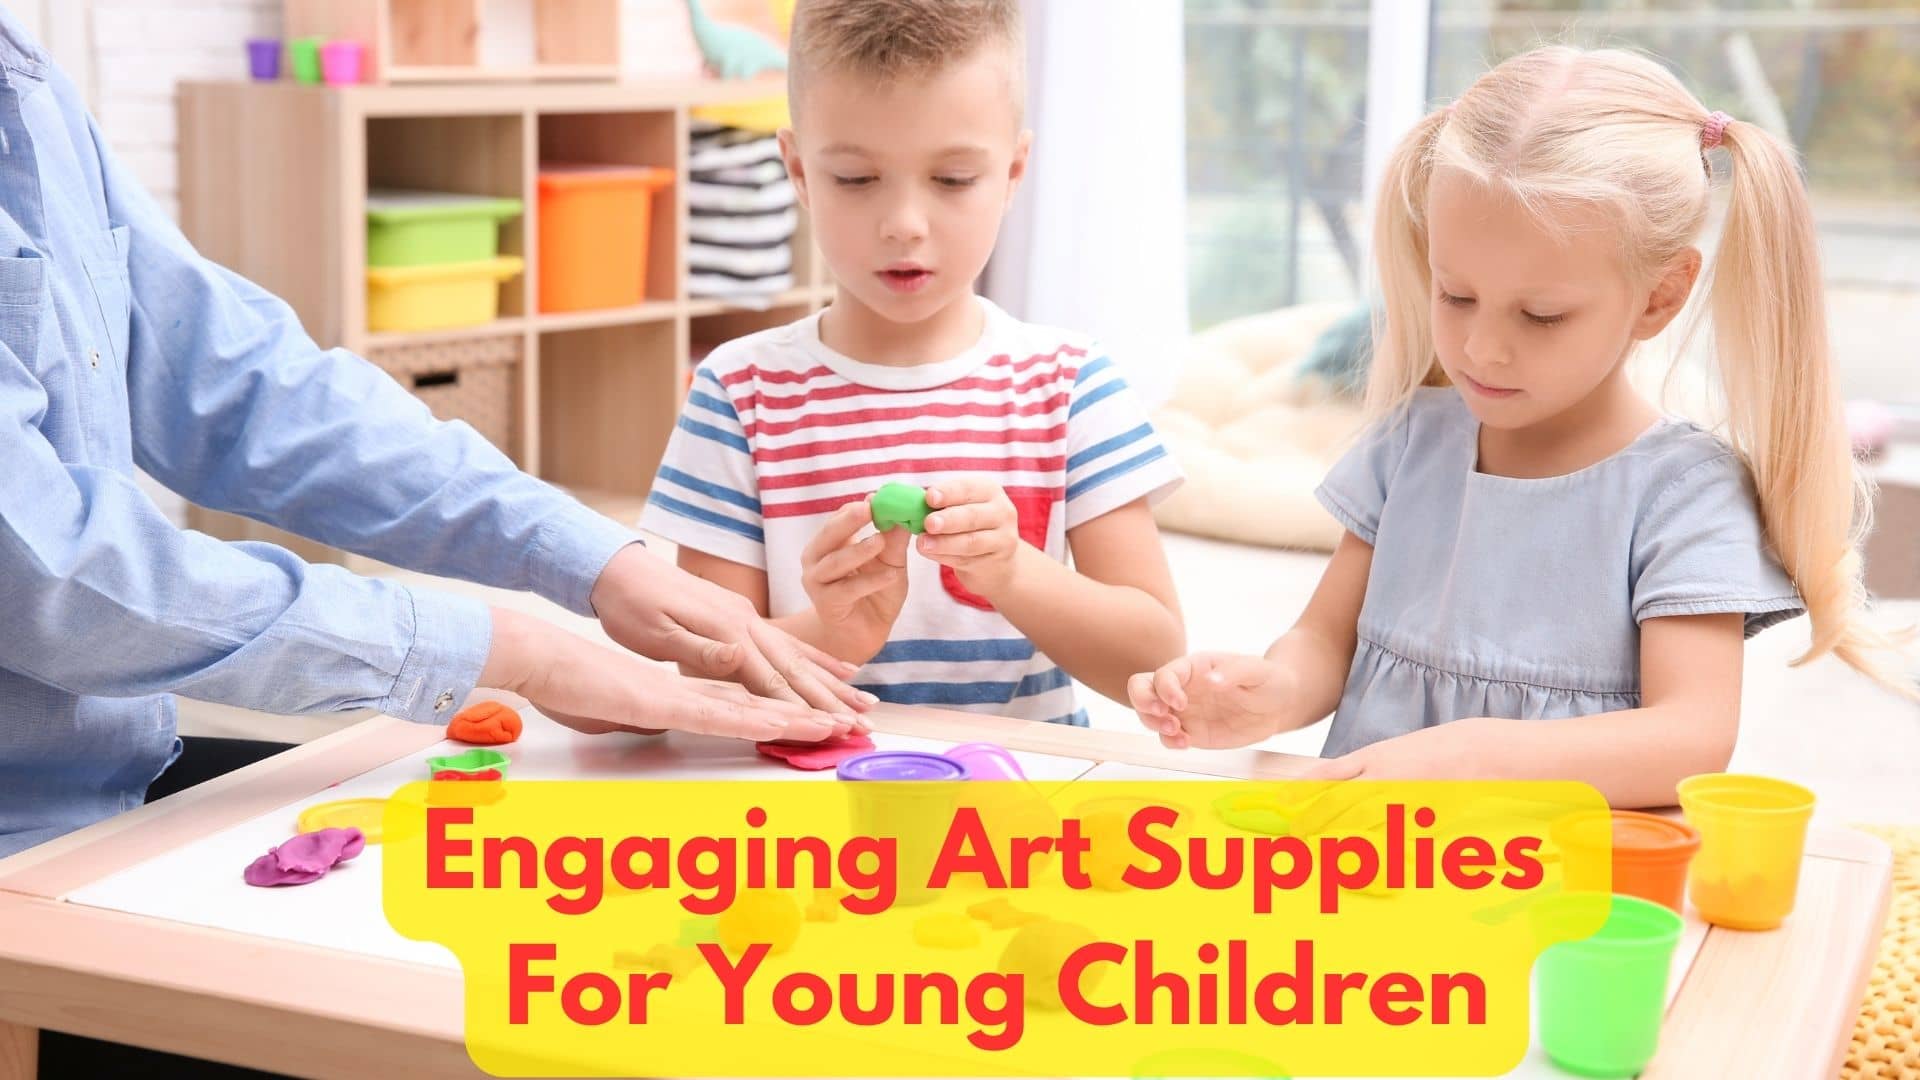 What Are Some Engaging Art Supplies For Young Children?